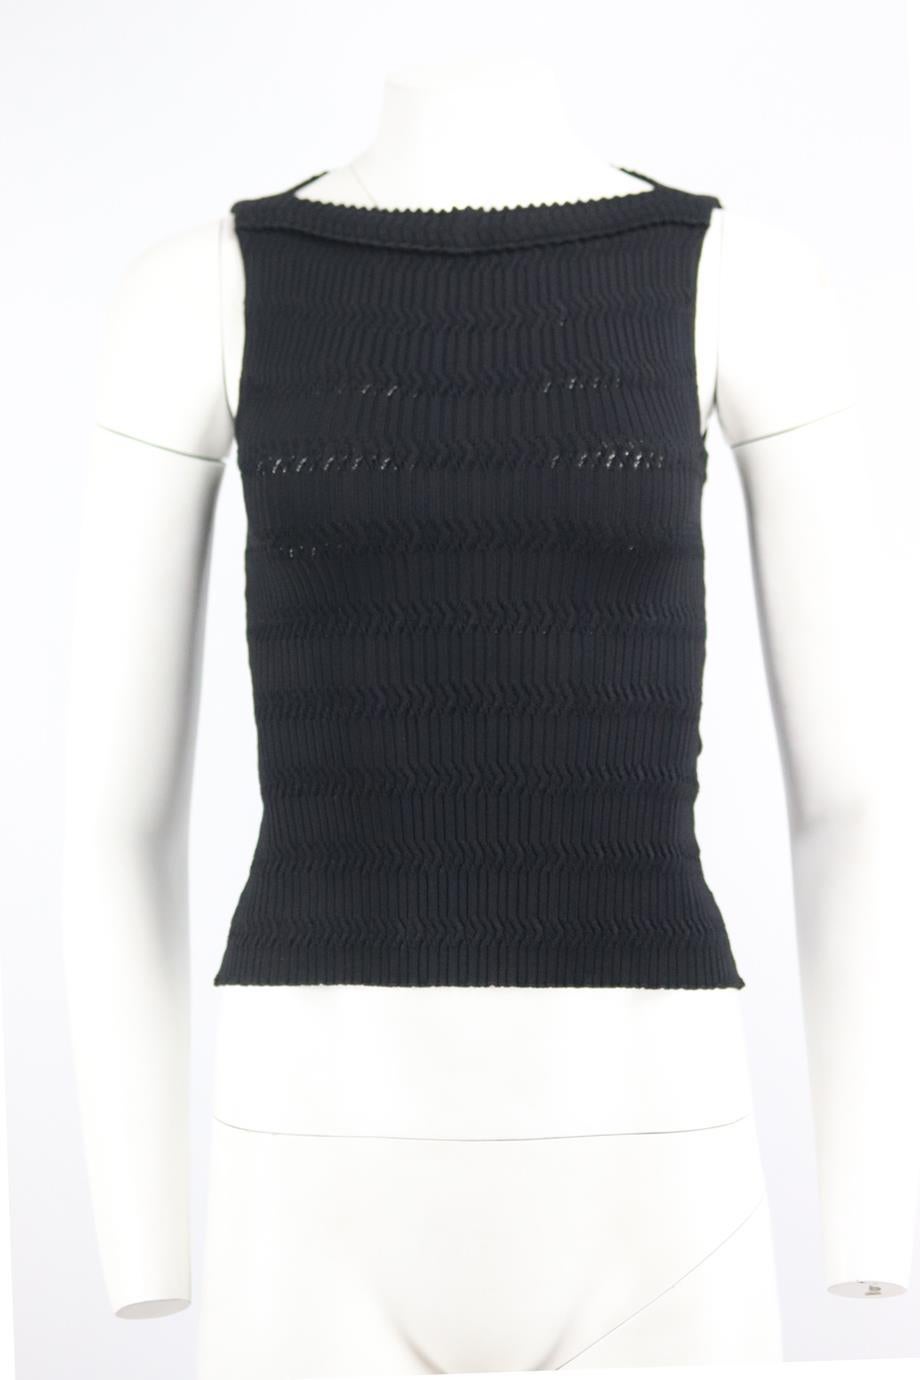 Azzedine Alaïa stretch knit top. Black. Sleeveless, crewneck. Zip fastening at side. 100% Viscose. Size: FR 36 (UK 8, US 4, IT 40). Bust: 20 in. Waist: 18 in. Hips: 22 in. Length: 18 in
